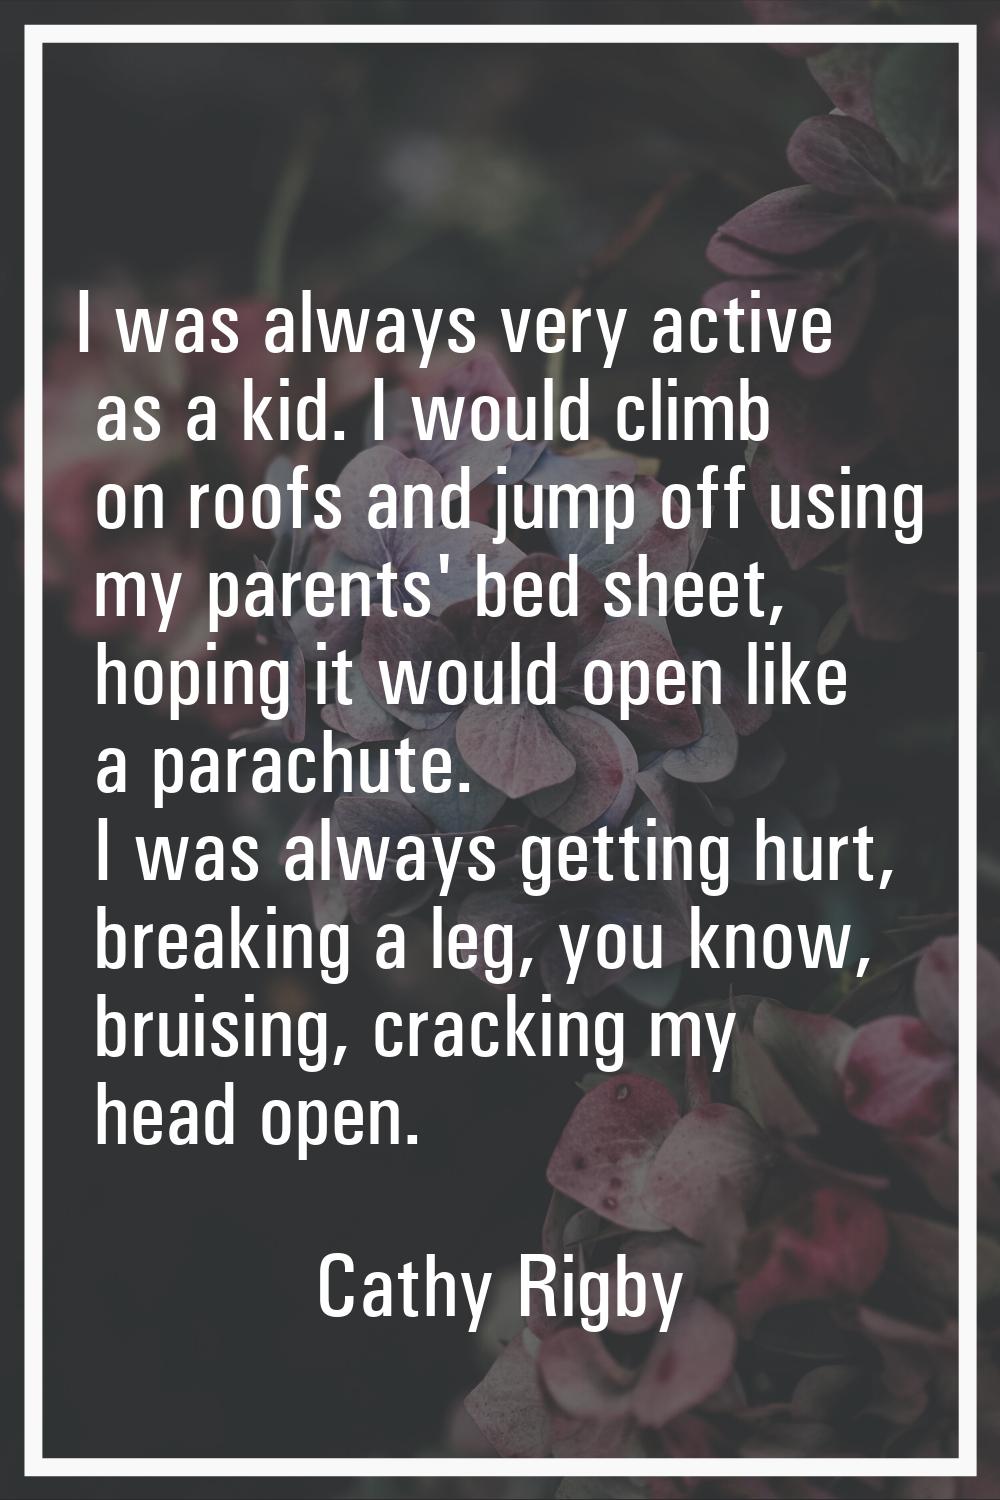 I was always very active as a kid. I would climb on roofs and jump off using my parents' bed sheet,